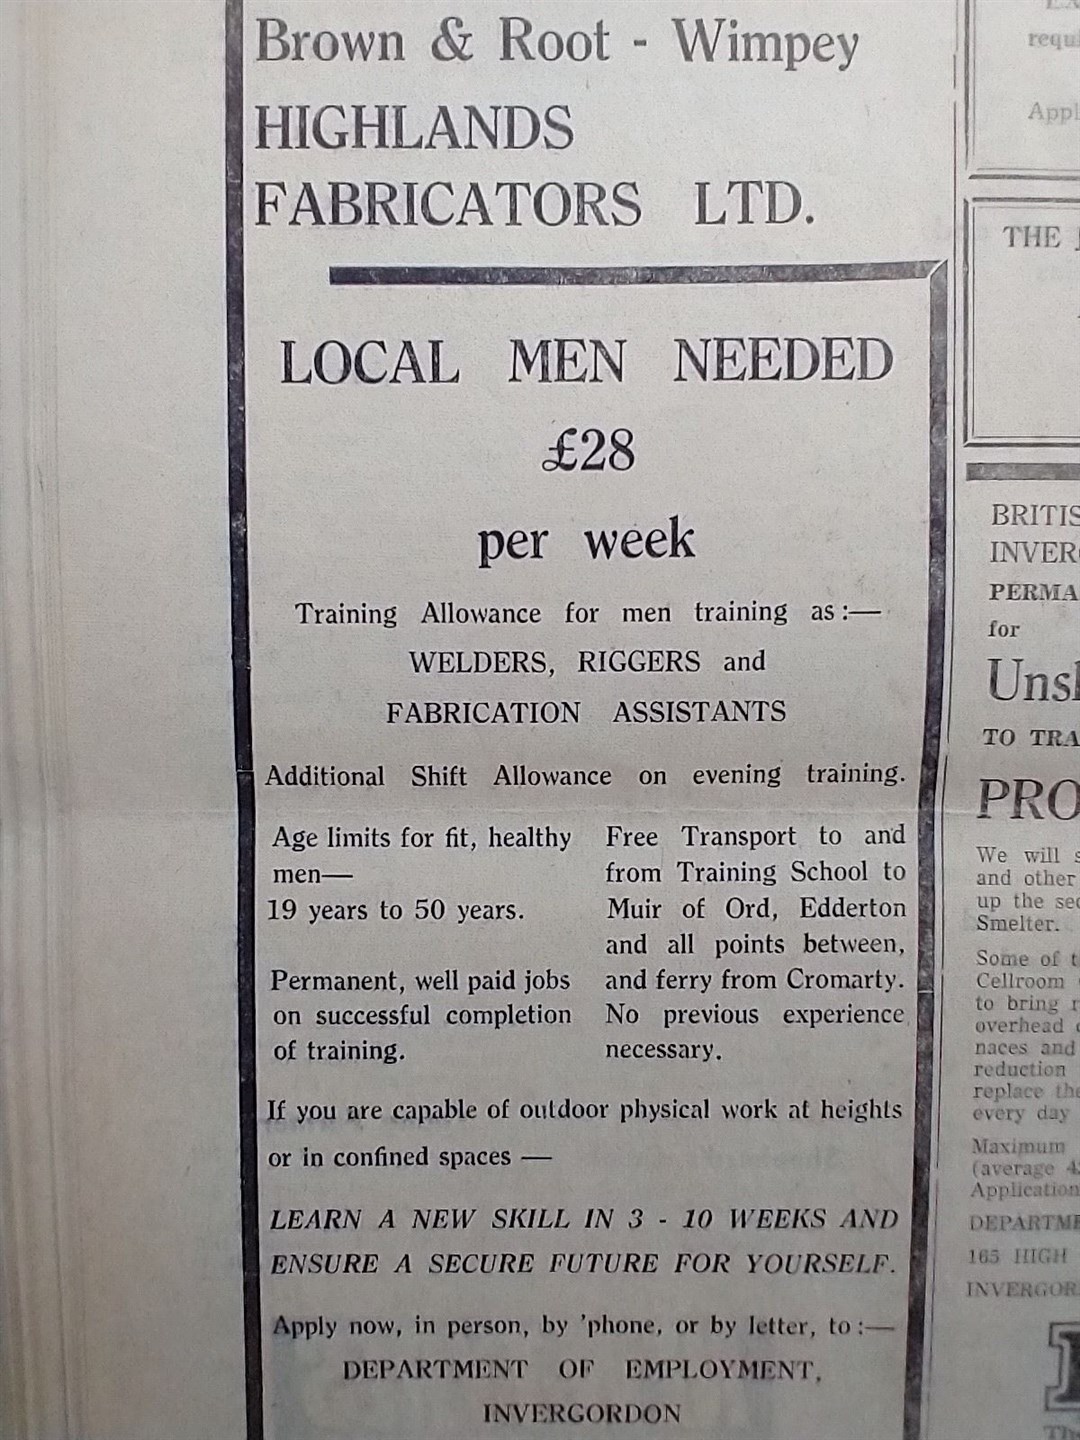 A job advert in the Journal 50 years ago.